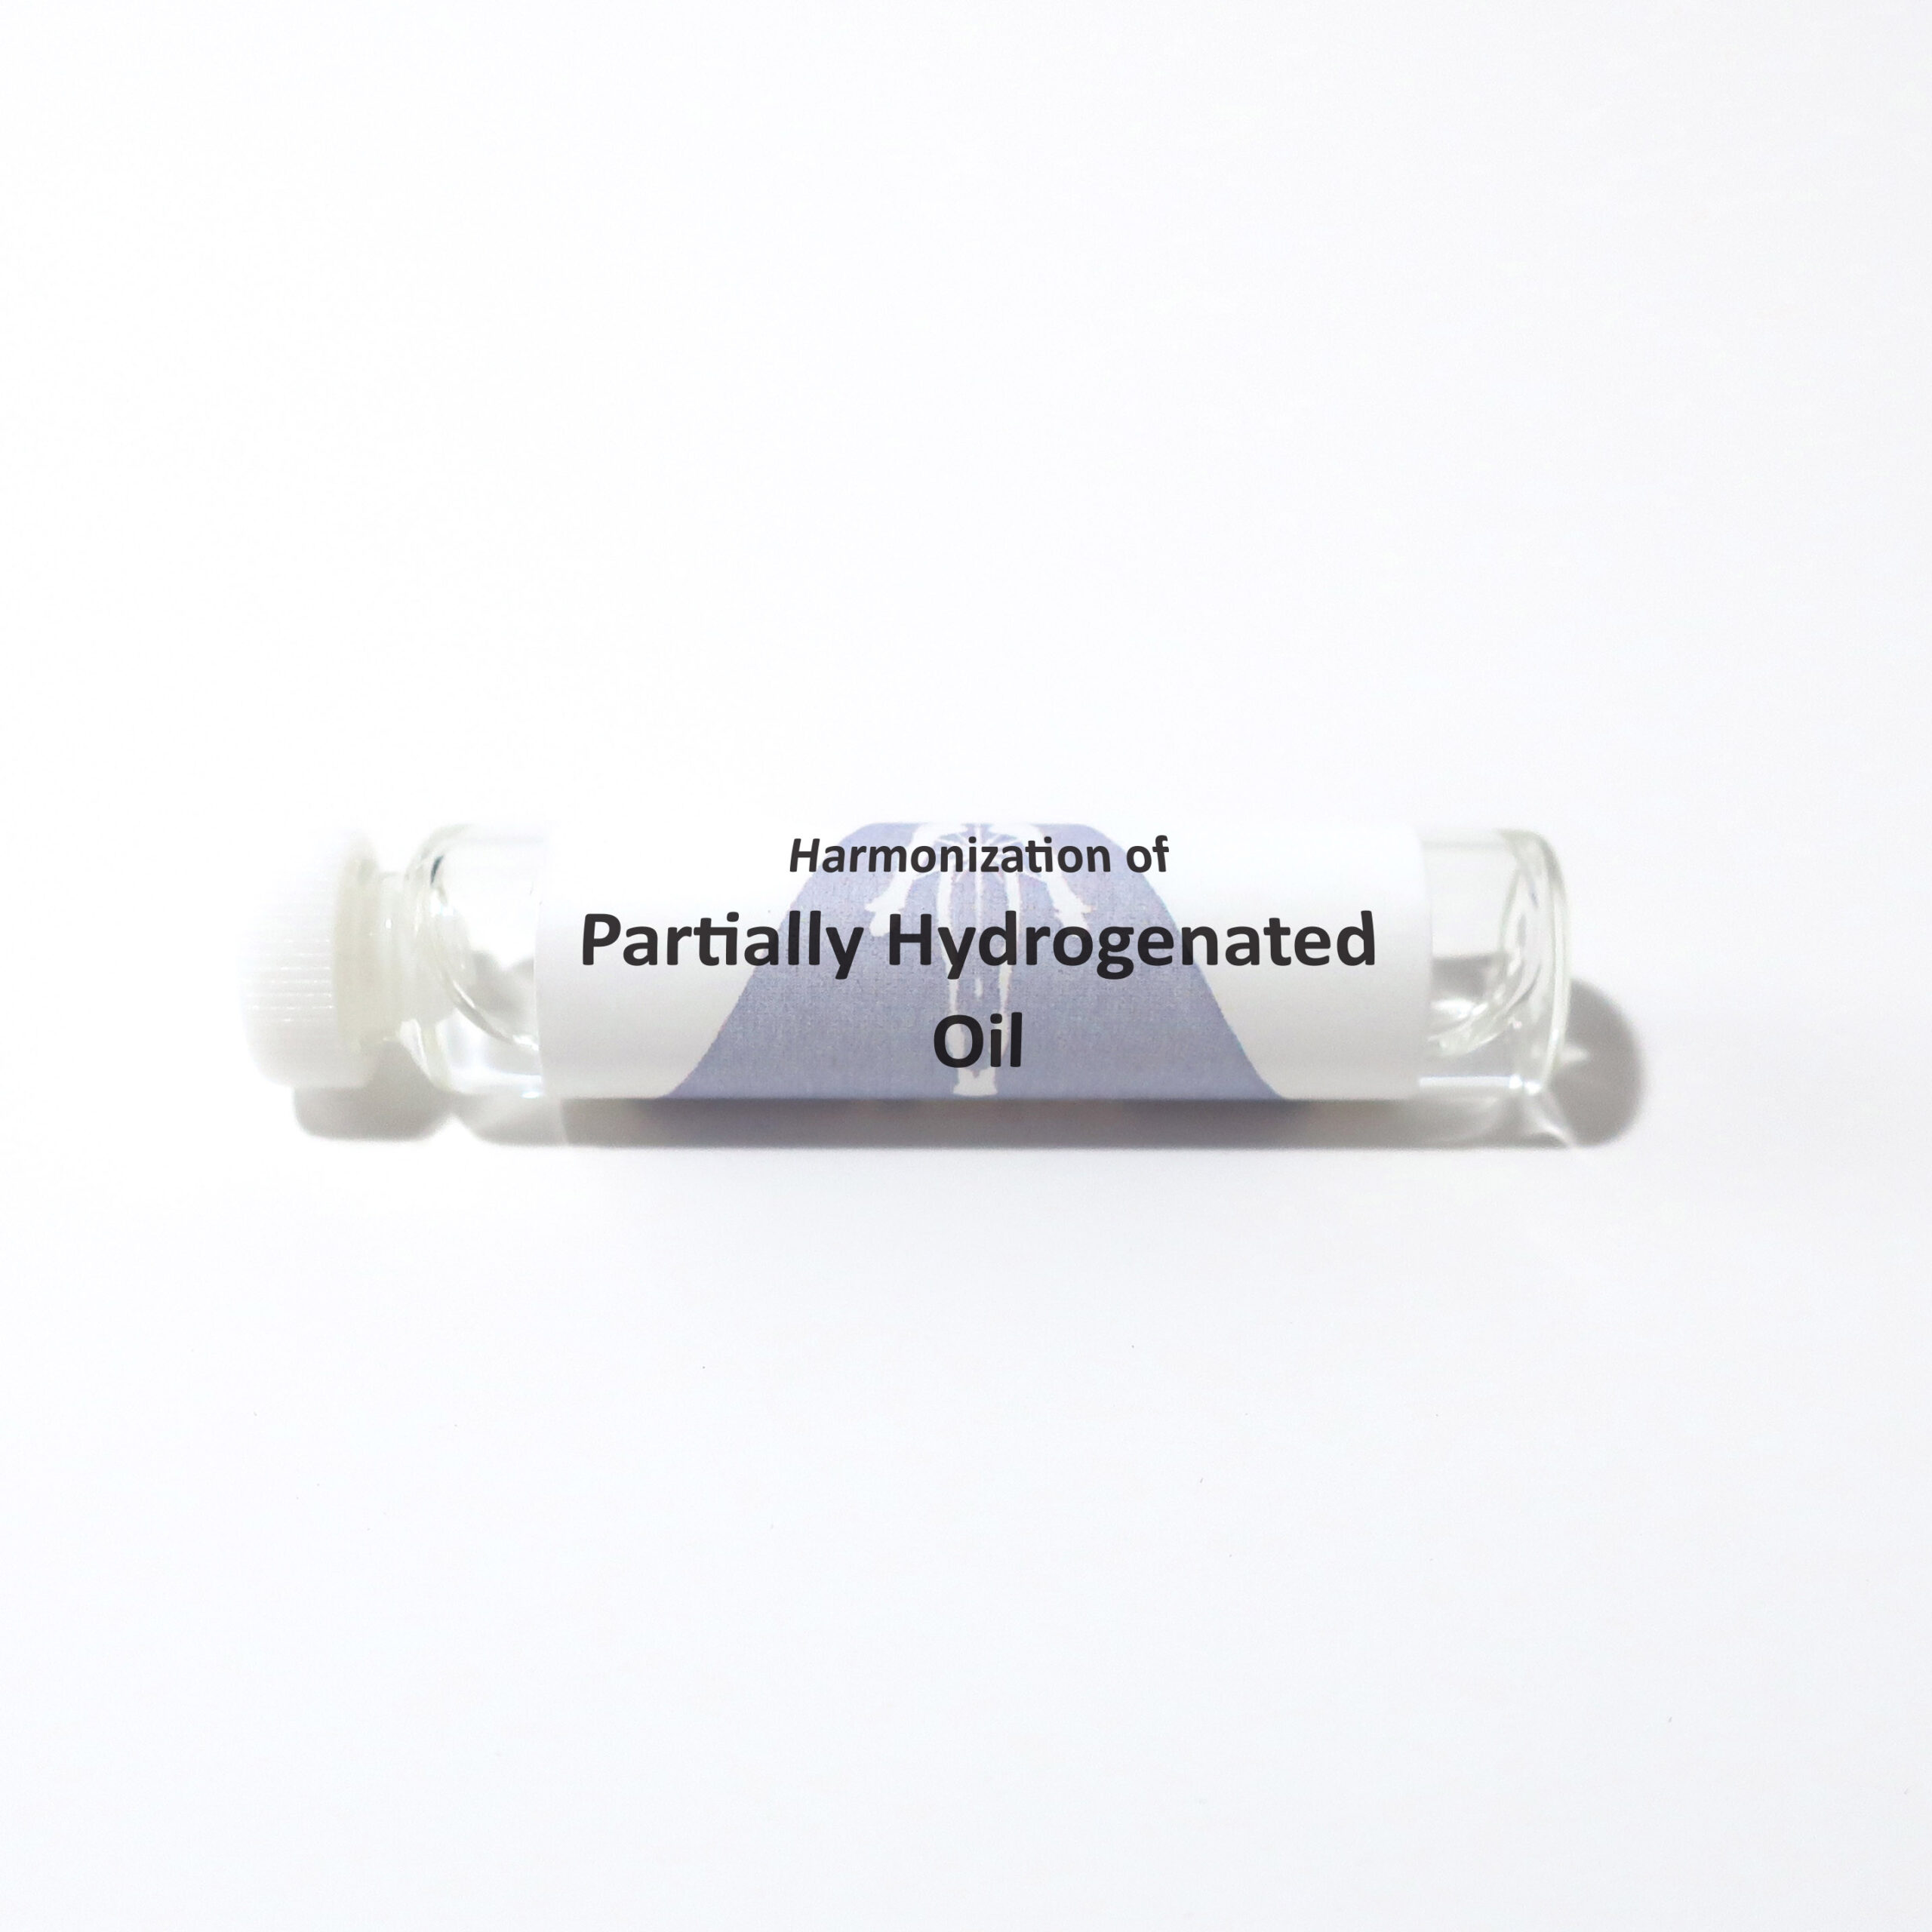 Partially Hydrogenated Oil